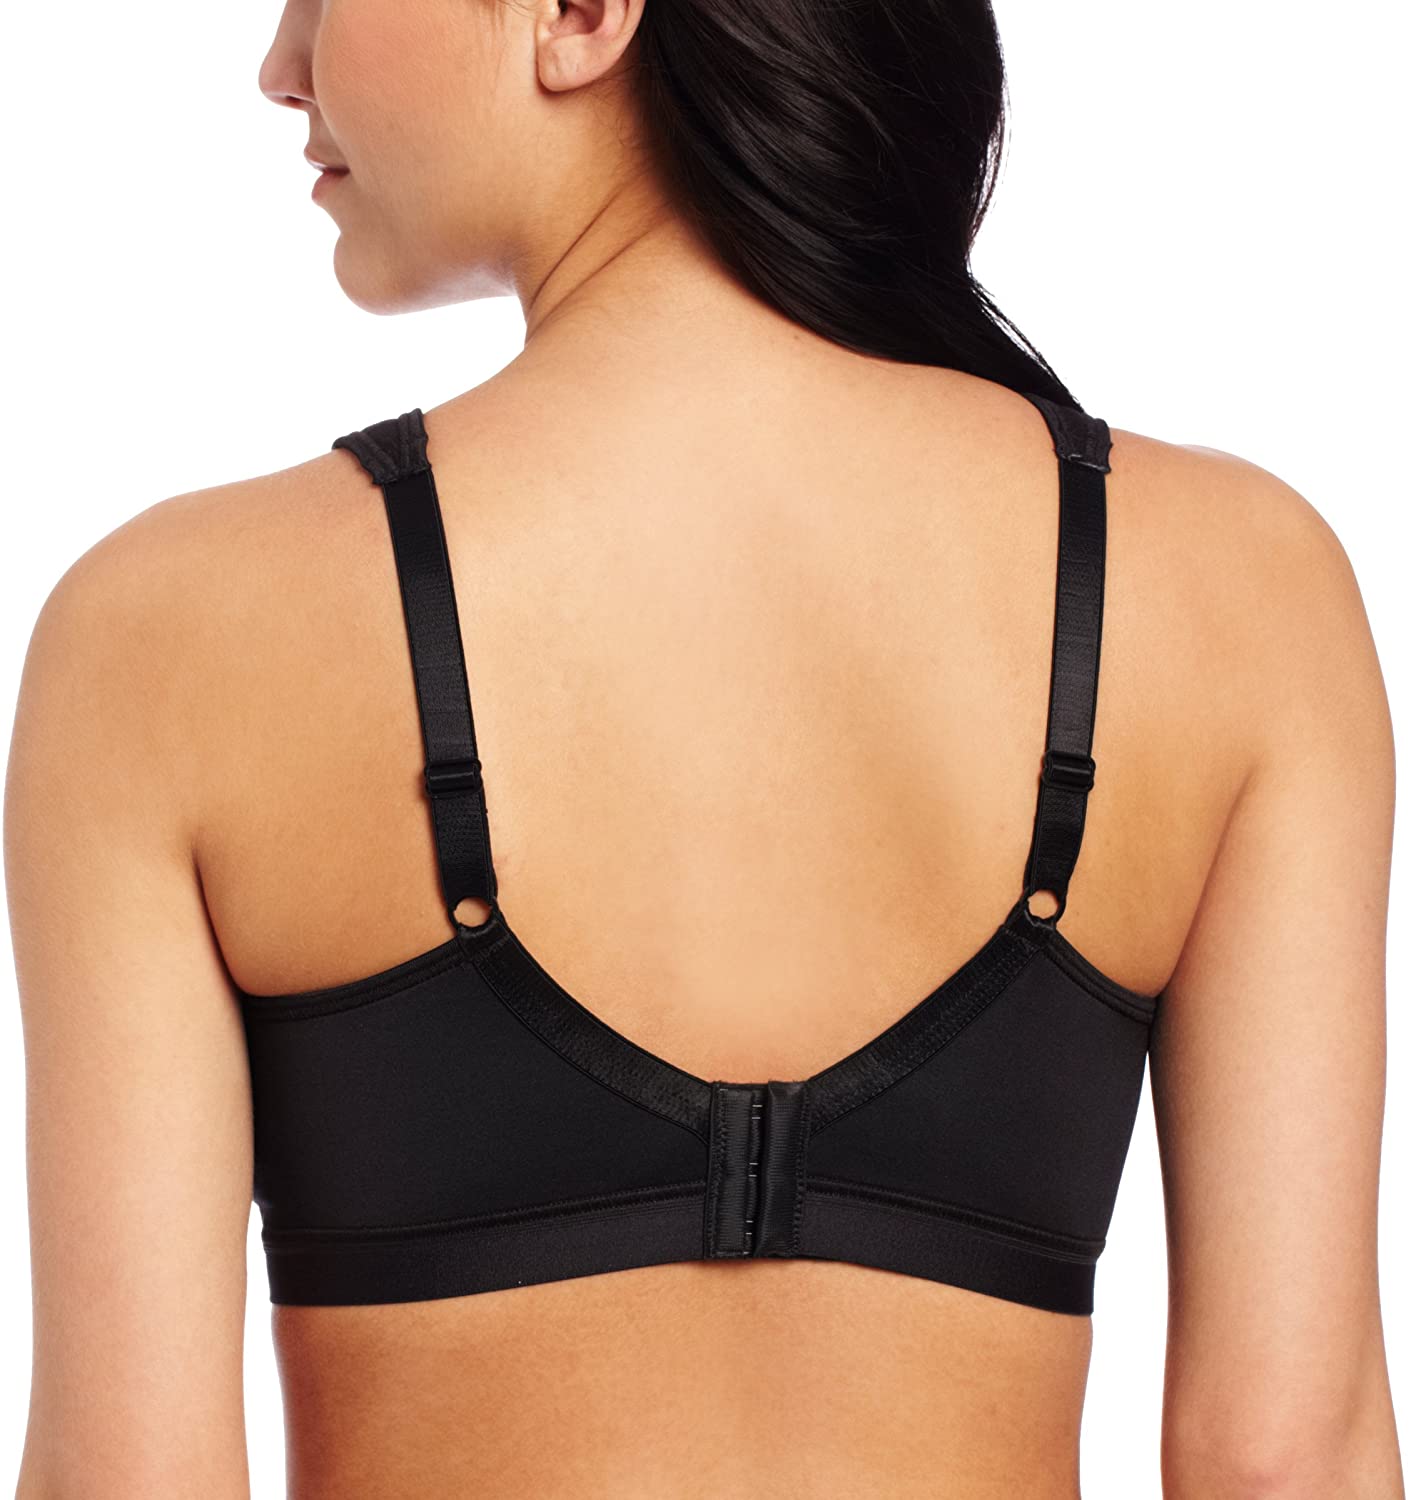 NEW WOMEN SIZE 38C PLAYTEX 18 HOUR ACTIVE BREATHABLE COMFORT BLACK WIREFREE  BRA